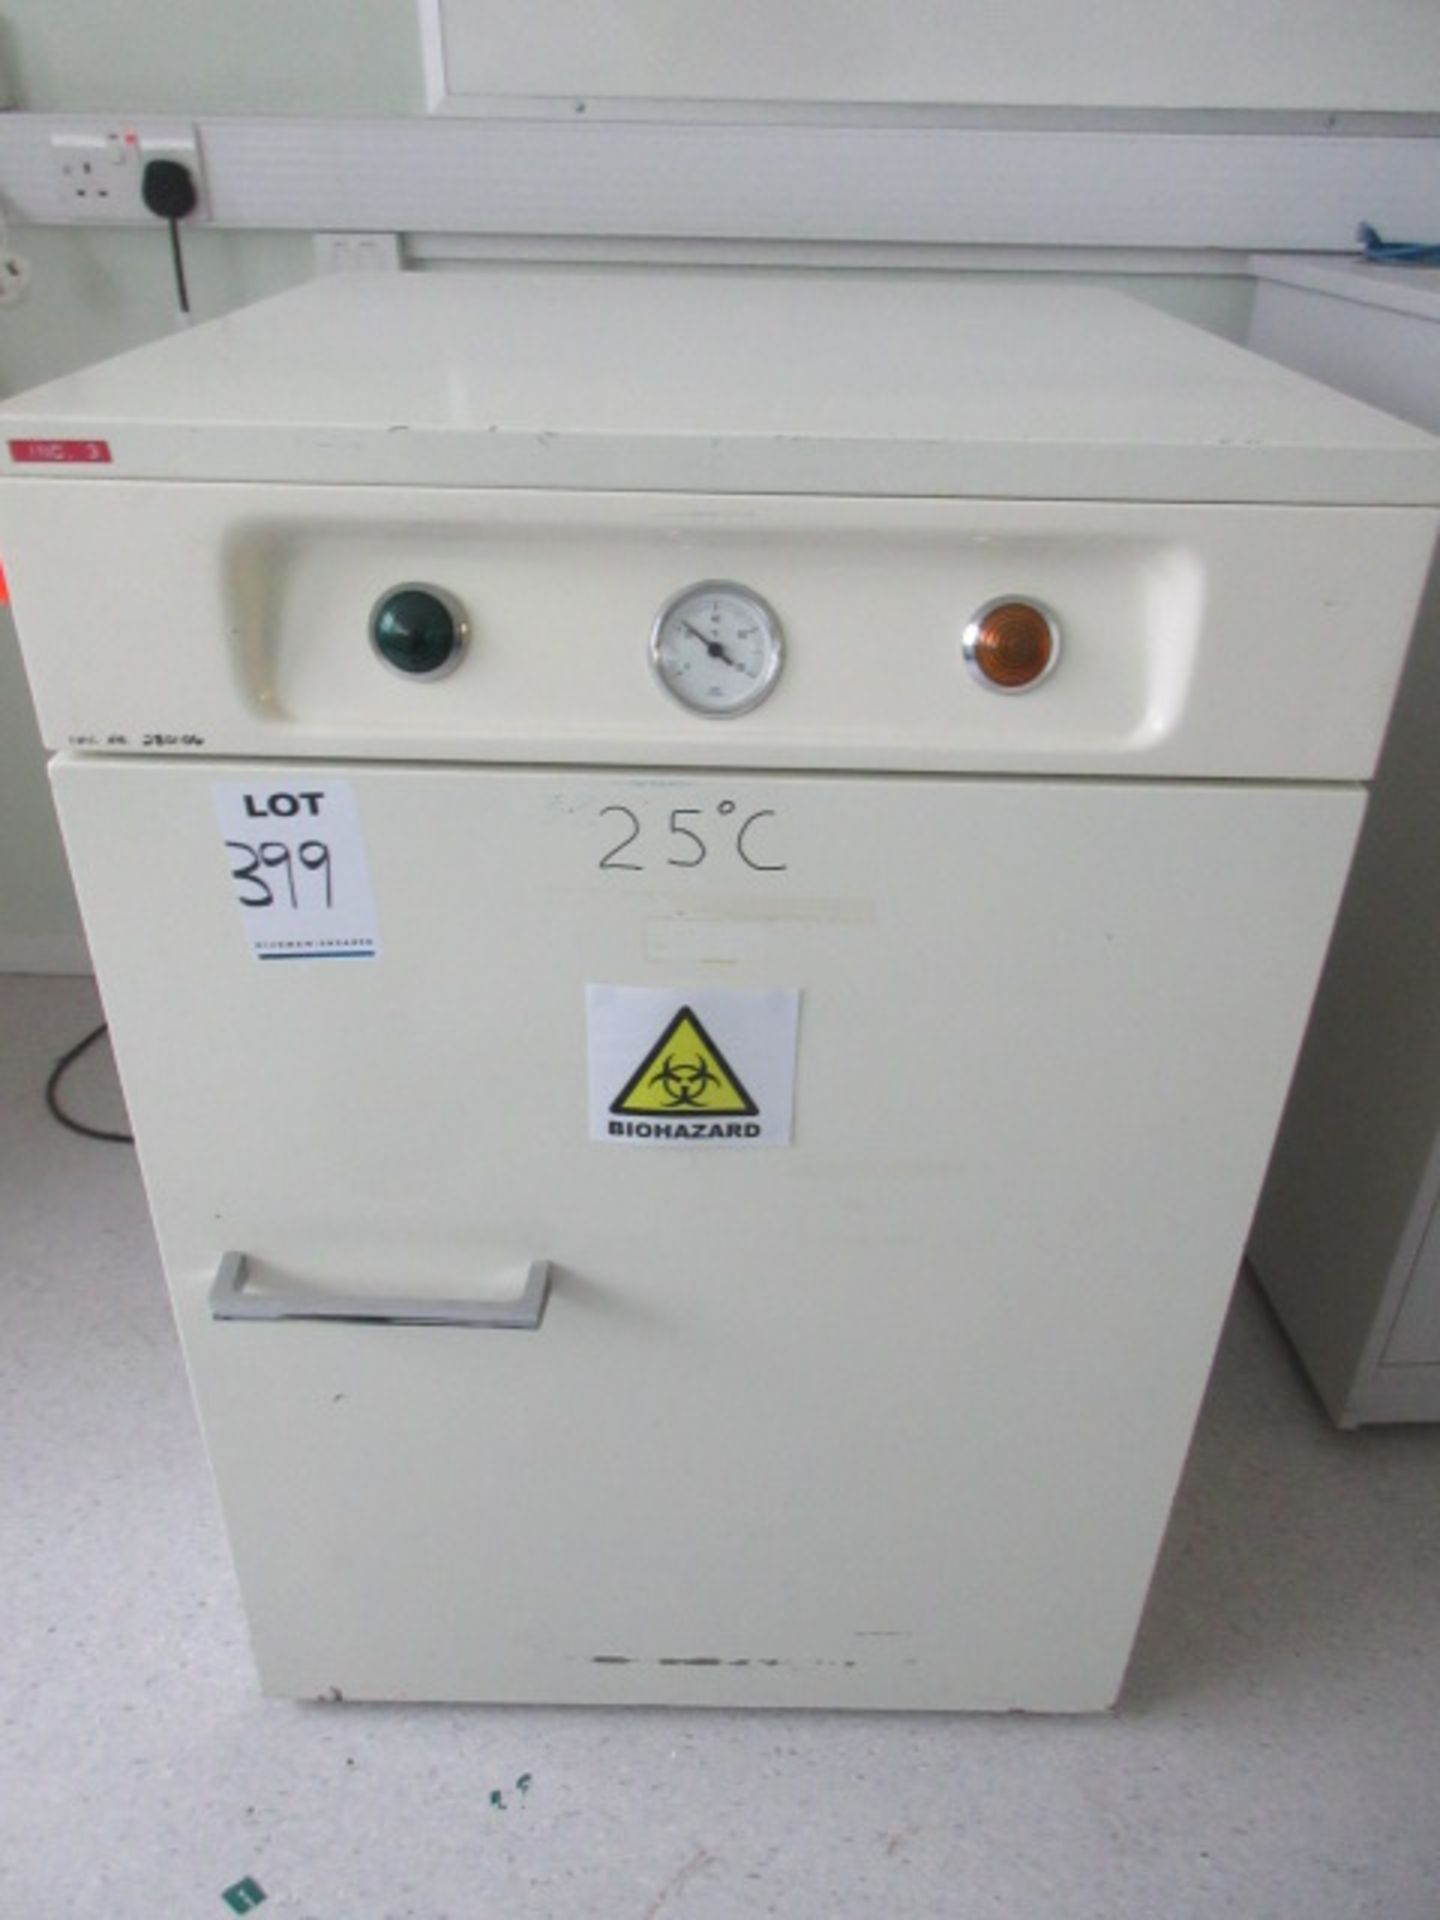 LABORATORY & ELECTRICAL ENG Co P2 ELECTRIC OVEN 480mm WIDE x 480mm DEEP x 600mm HIGH 240V